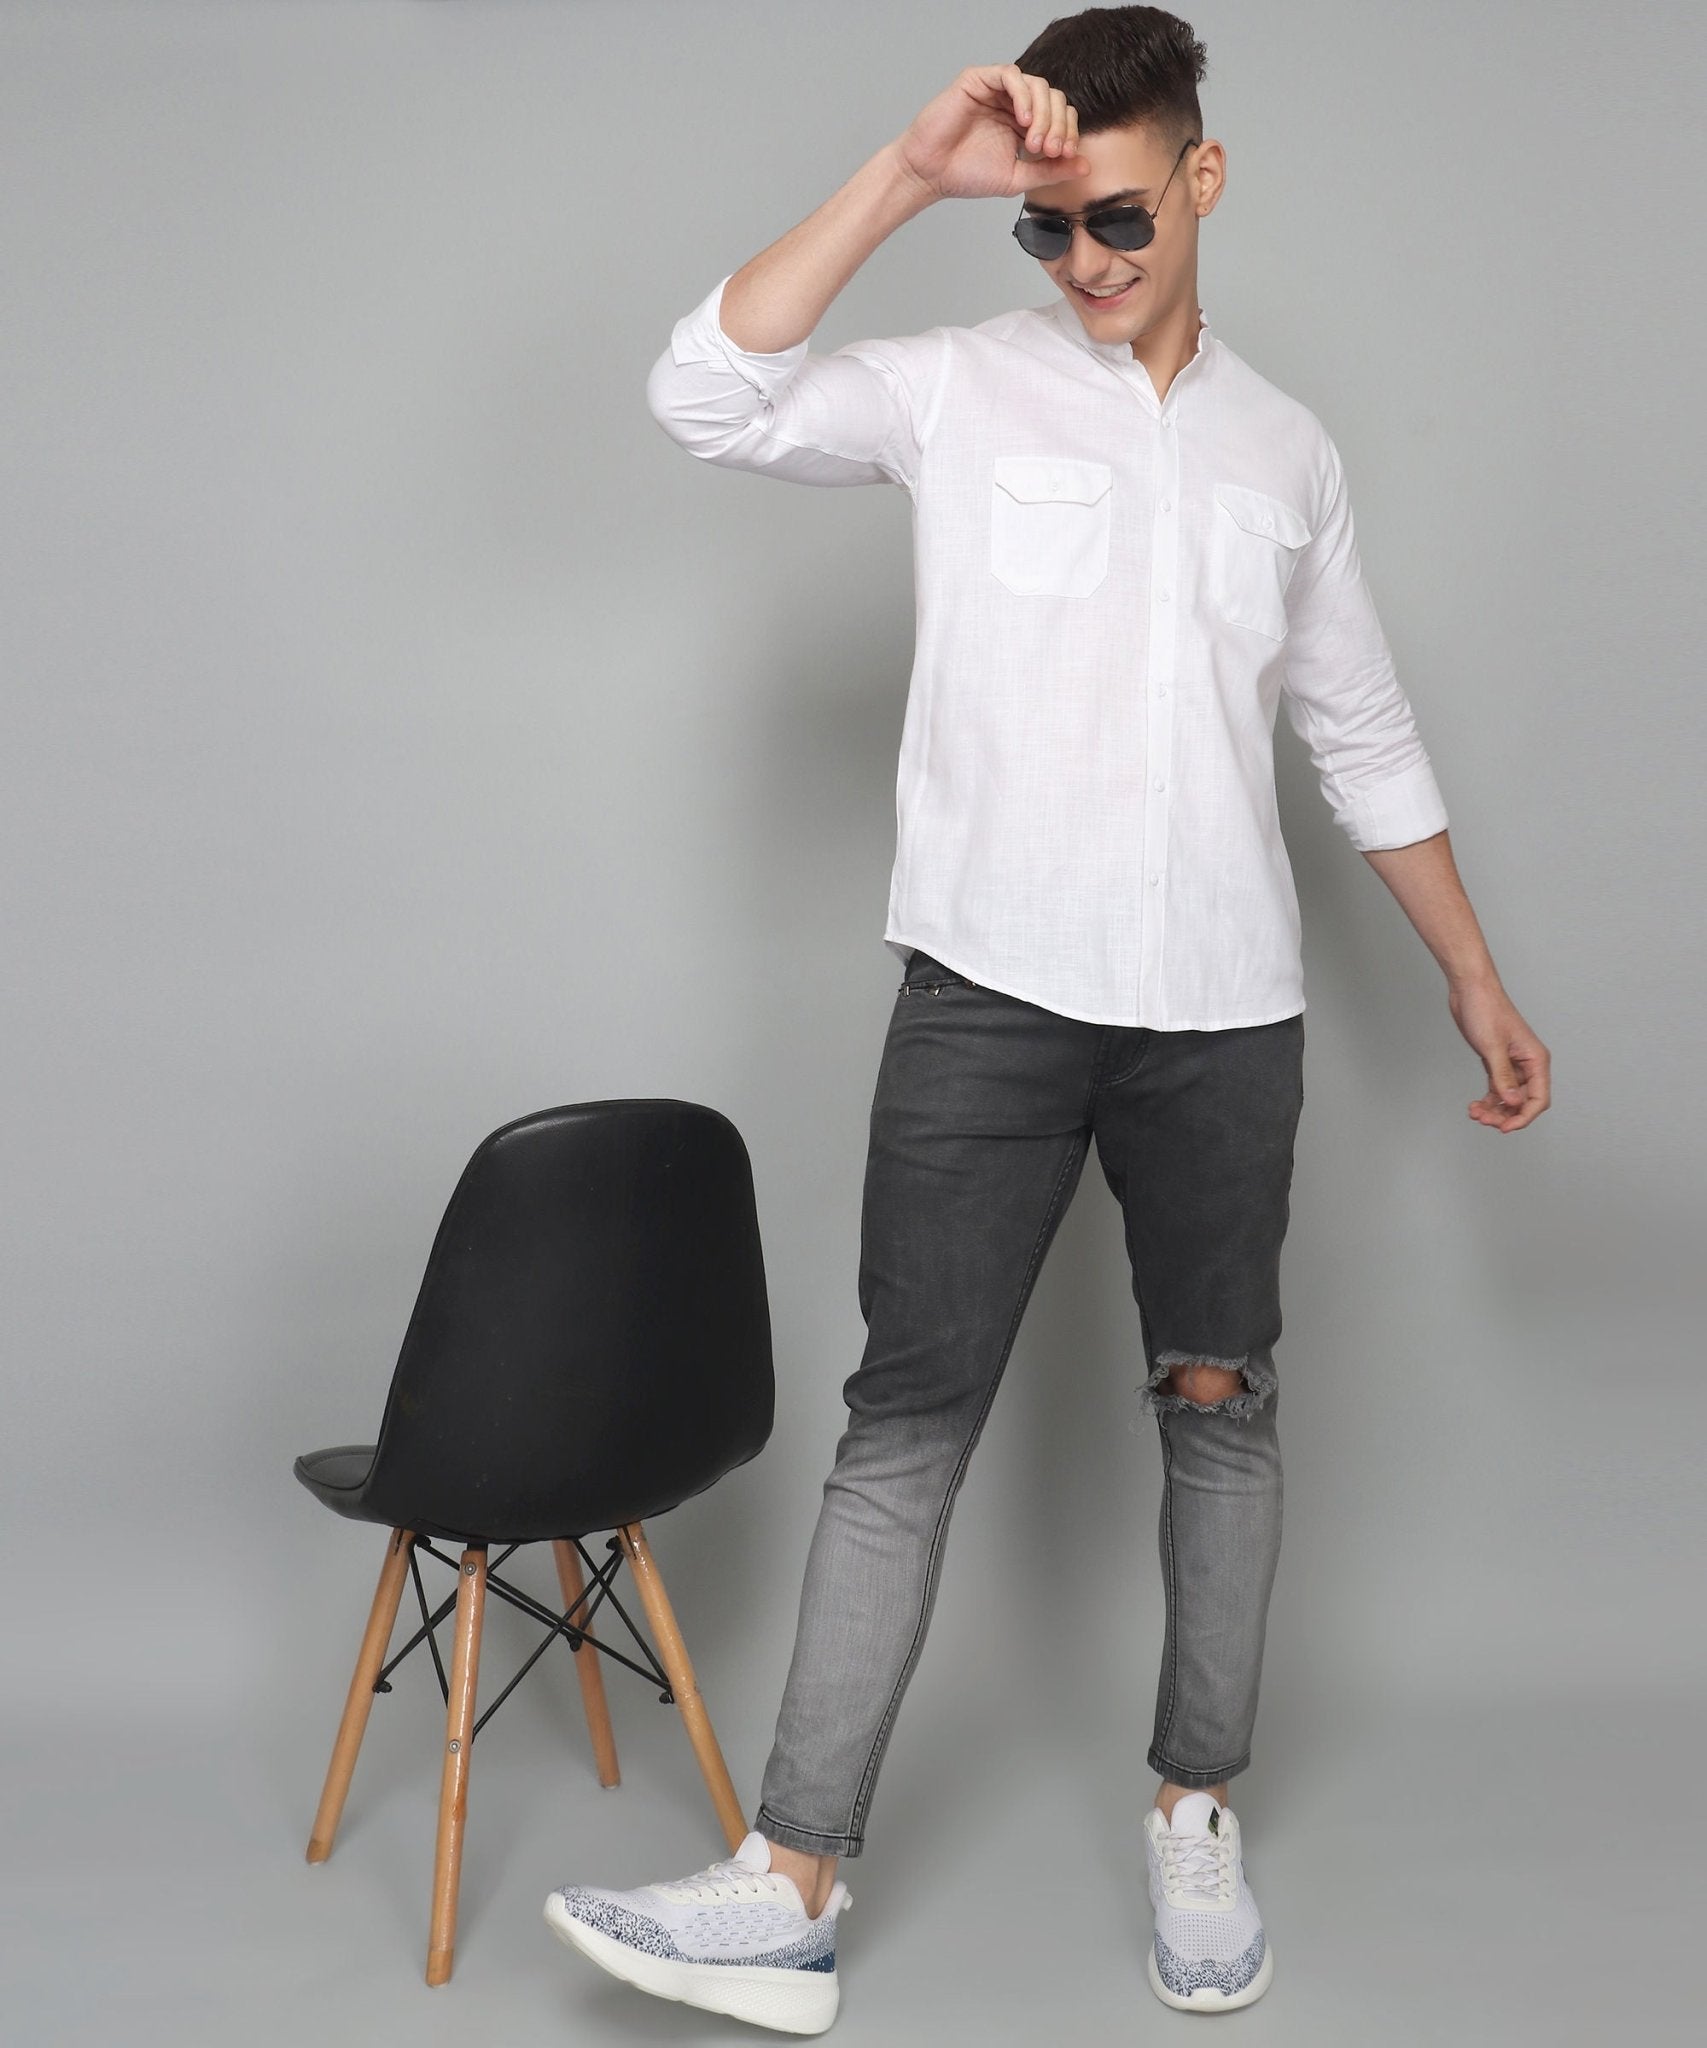 Fancy Fabulous TryBuy Premium White Solid Cotton Linen Casual Double Pocket Shirt - TryBuy® USA🇺🇸